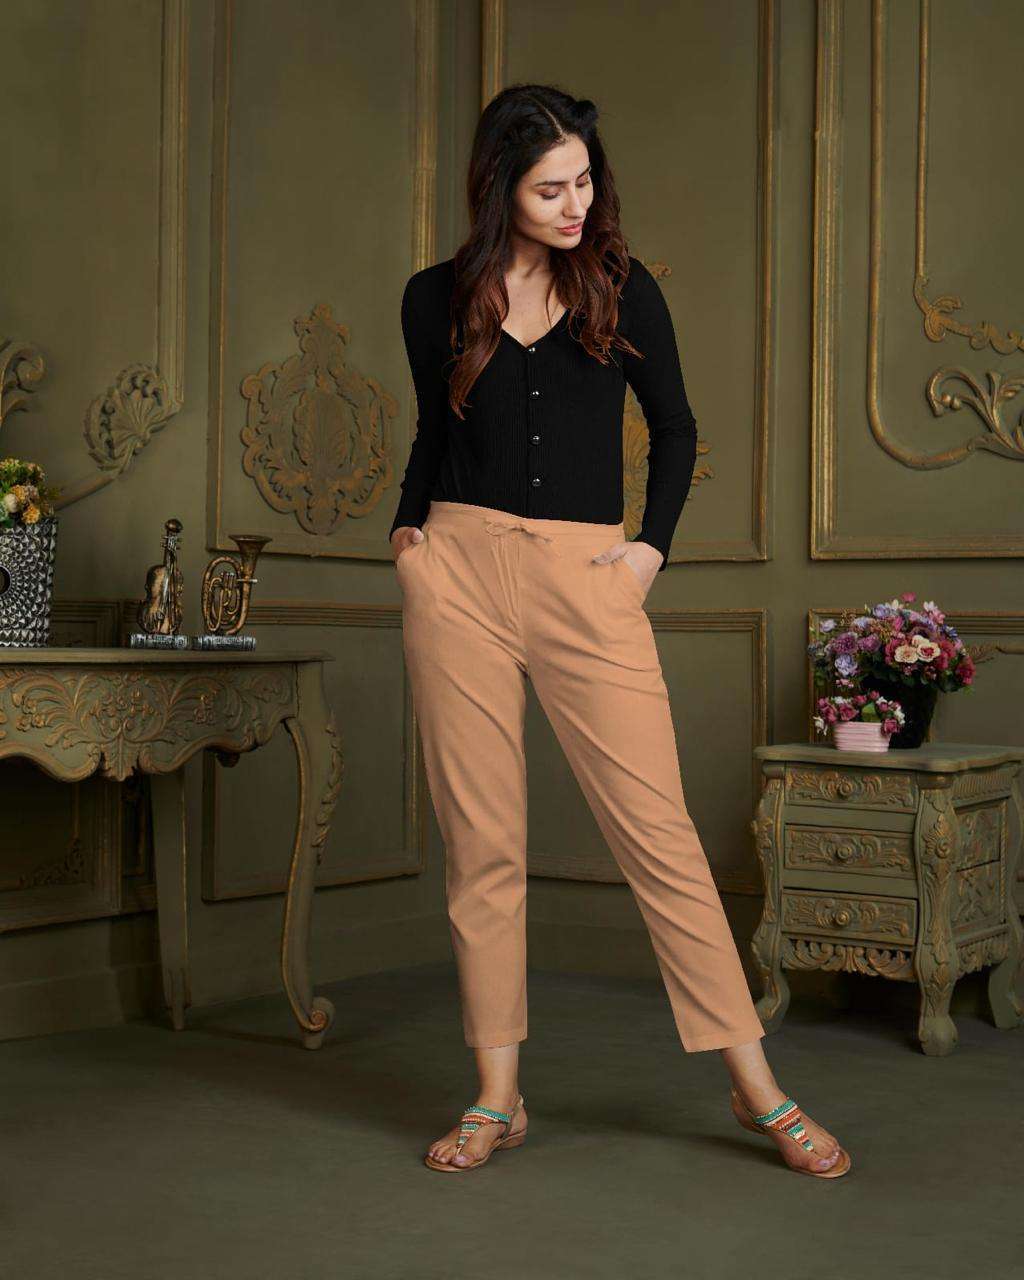 Gufesf Women S Business Casual Pants Dressy Casual Pants India | Ubuy